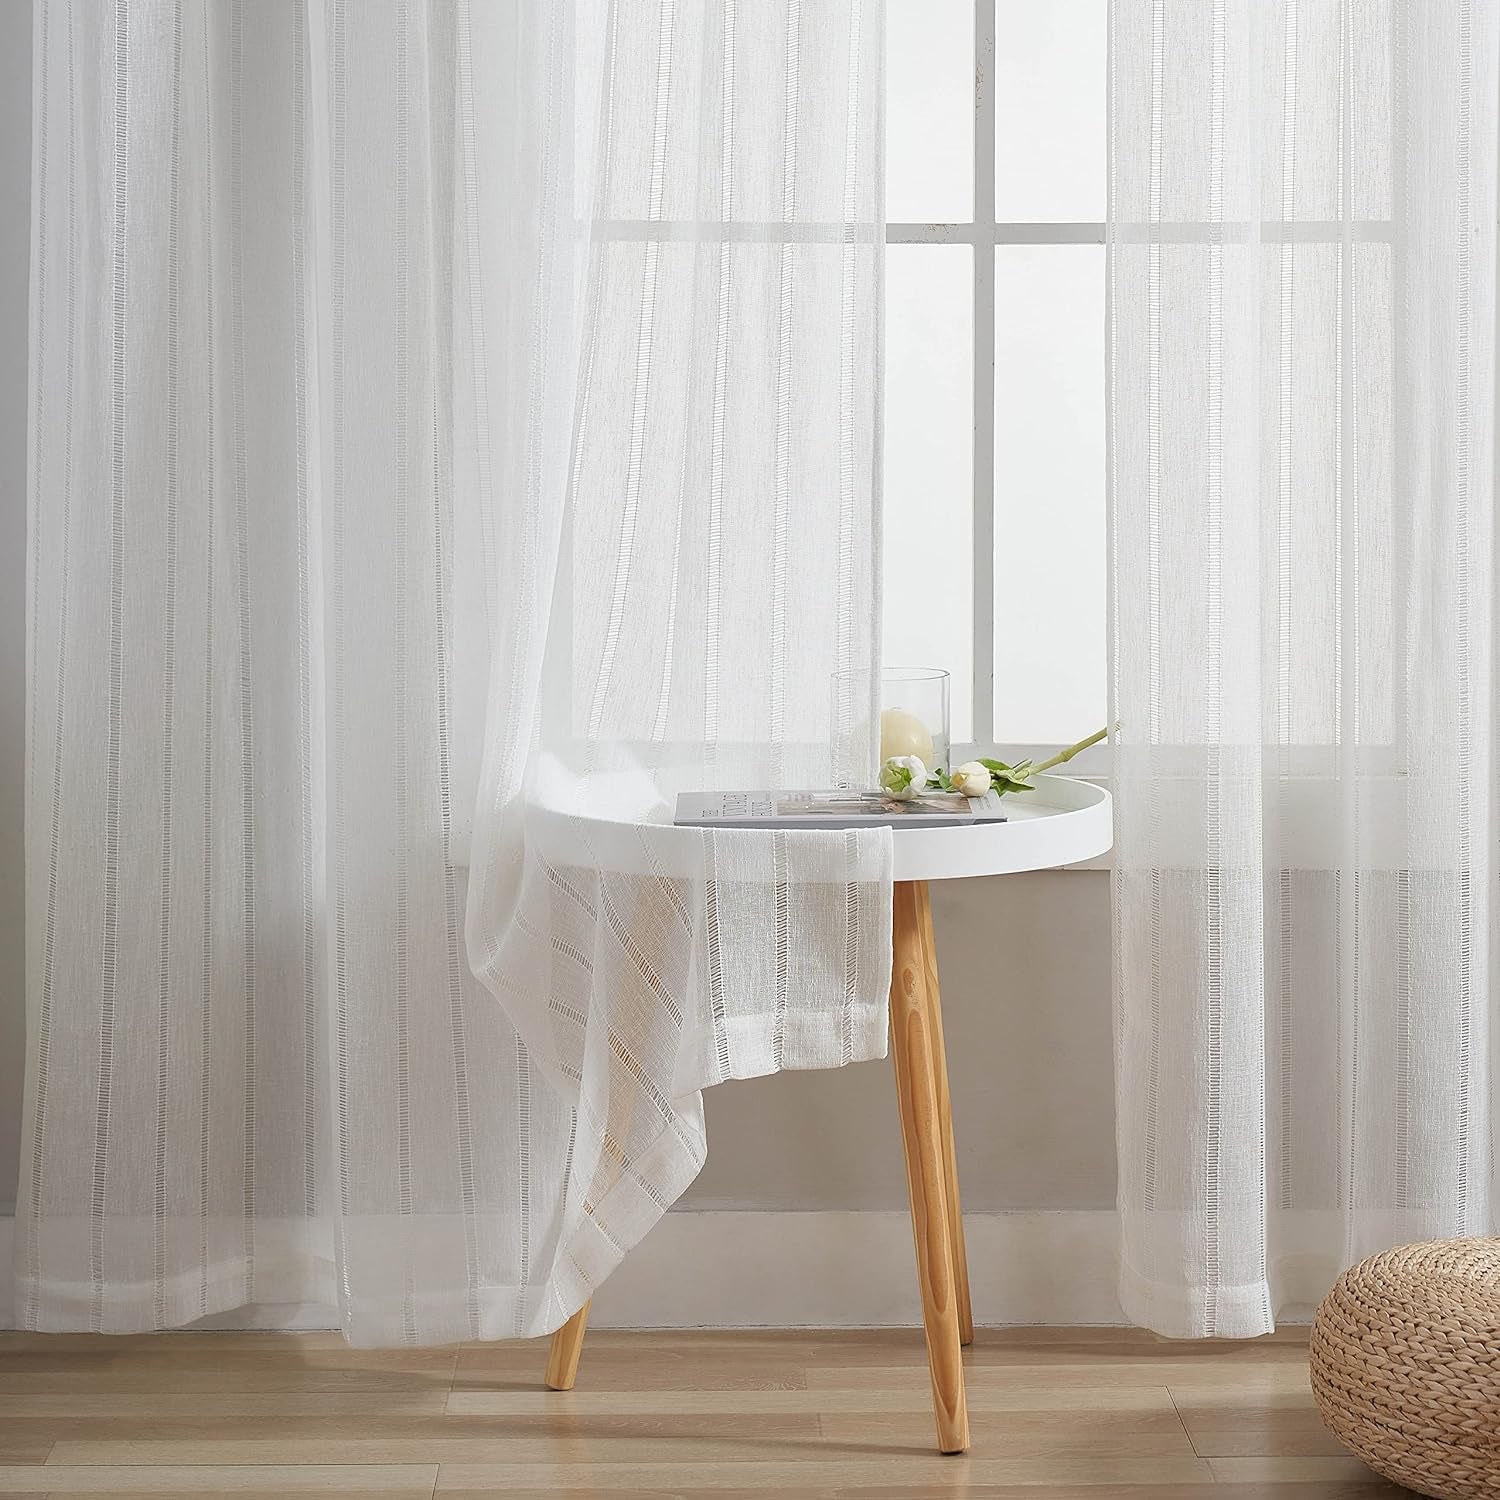 Home Brilliant White Sheer Curtains 45 Inch Length Striped Window Voile Curtains Stripes Panels for Bedroom Farmhouse Rustic Curtain, Set of 2, 54 Inch X 45 Inch, White  Home Brilliant   